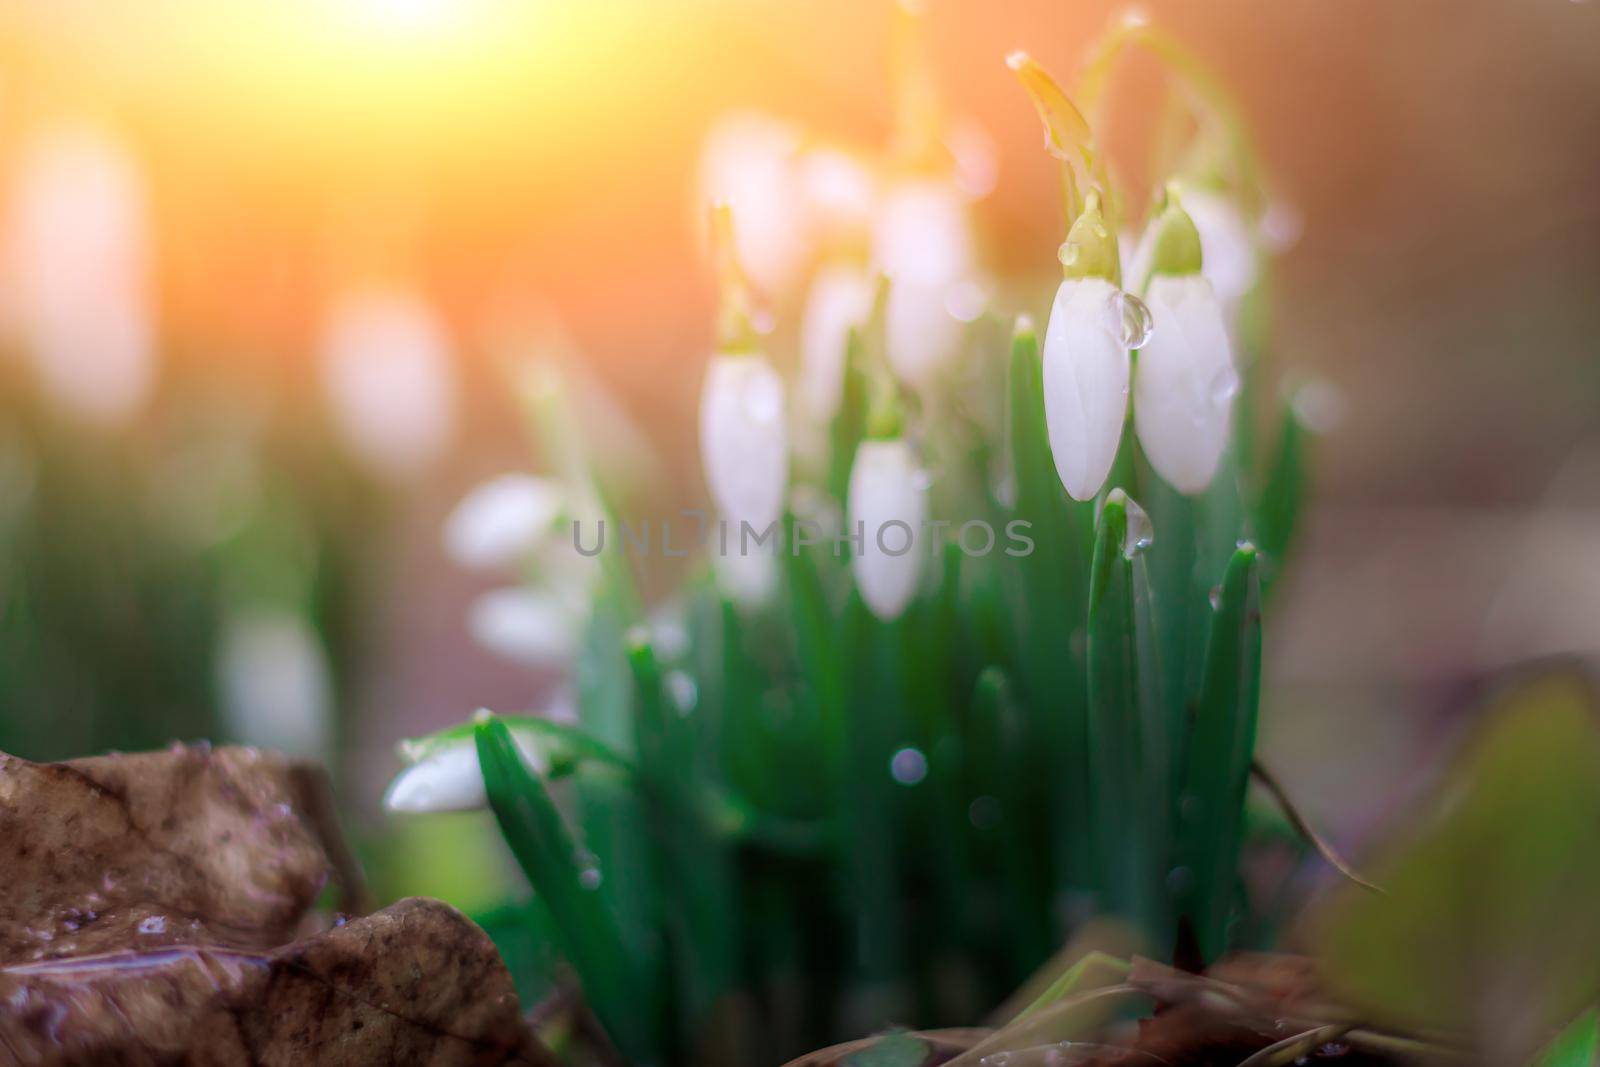 snowdrops. First spring flowers. Floral background. Flash in the photo. Water drops on the flower.